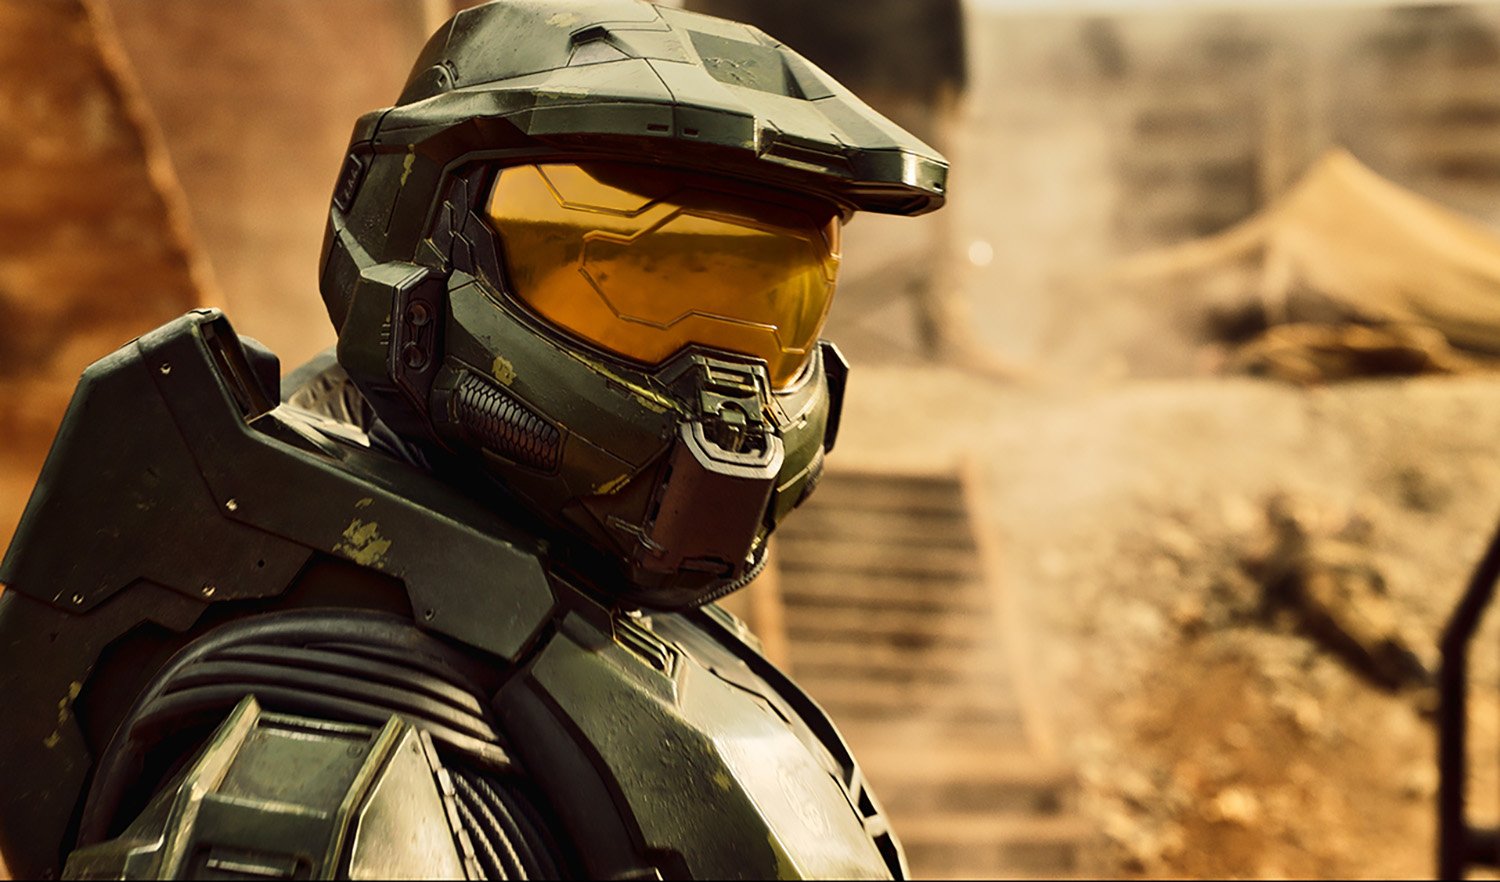 Halo TV series: Who is in the cast?